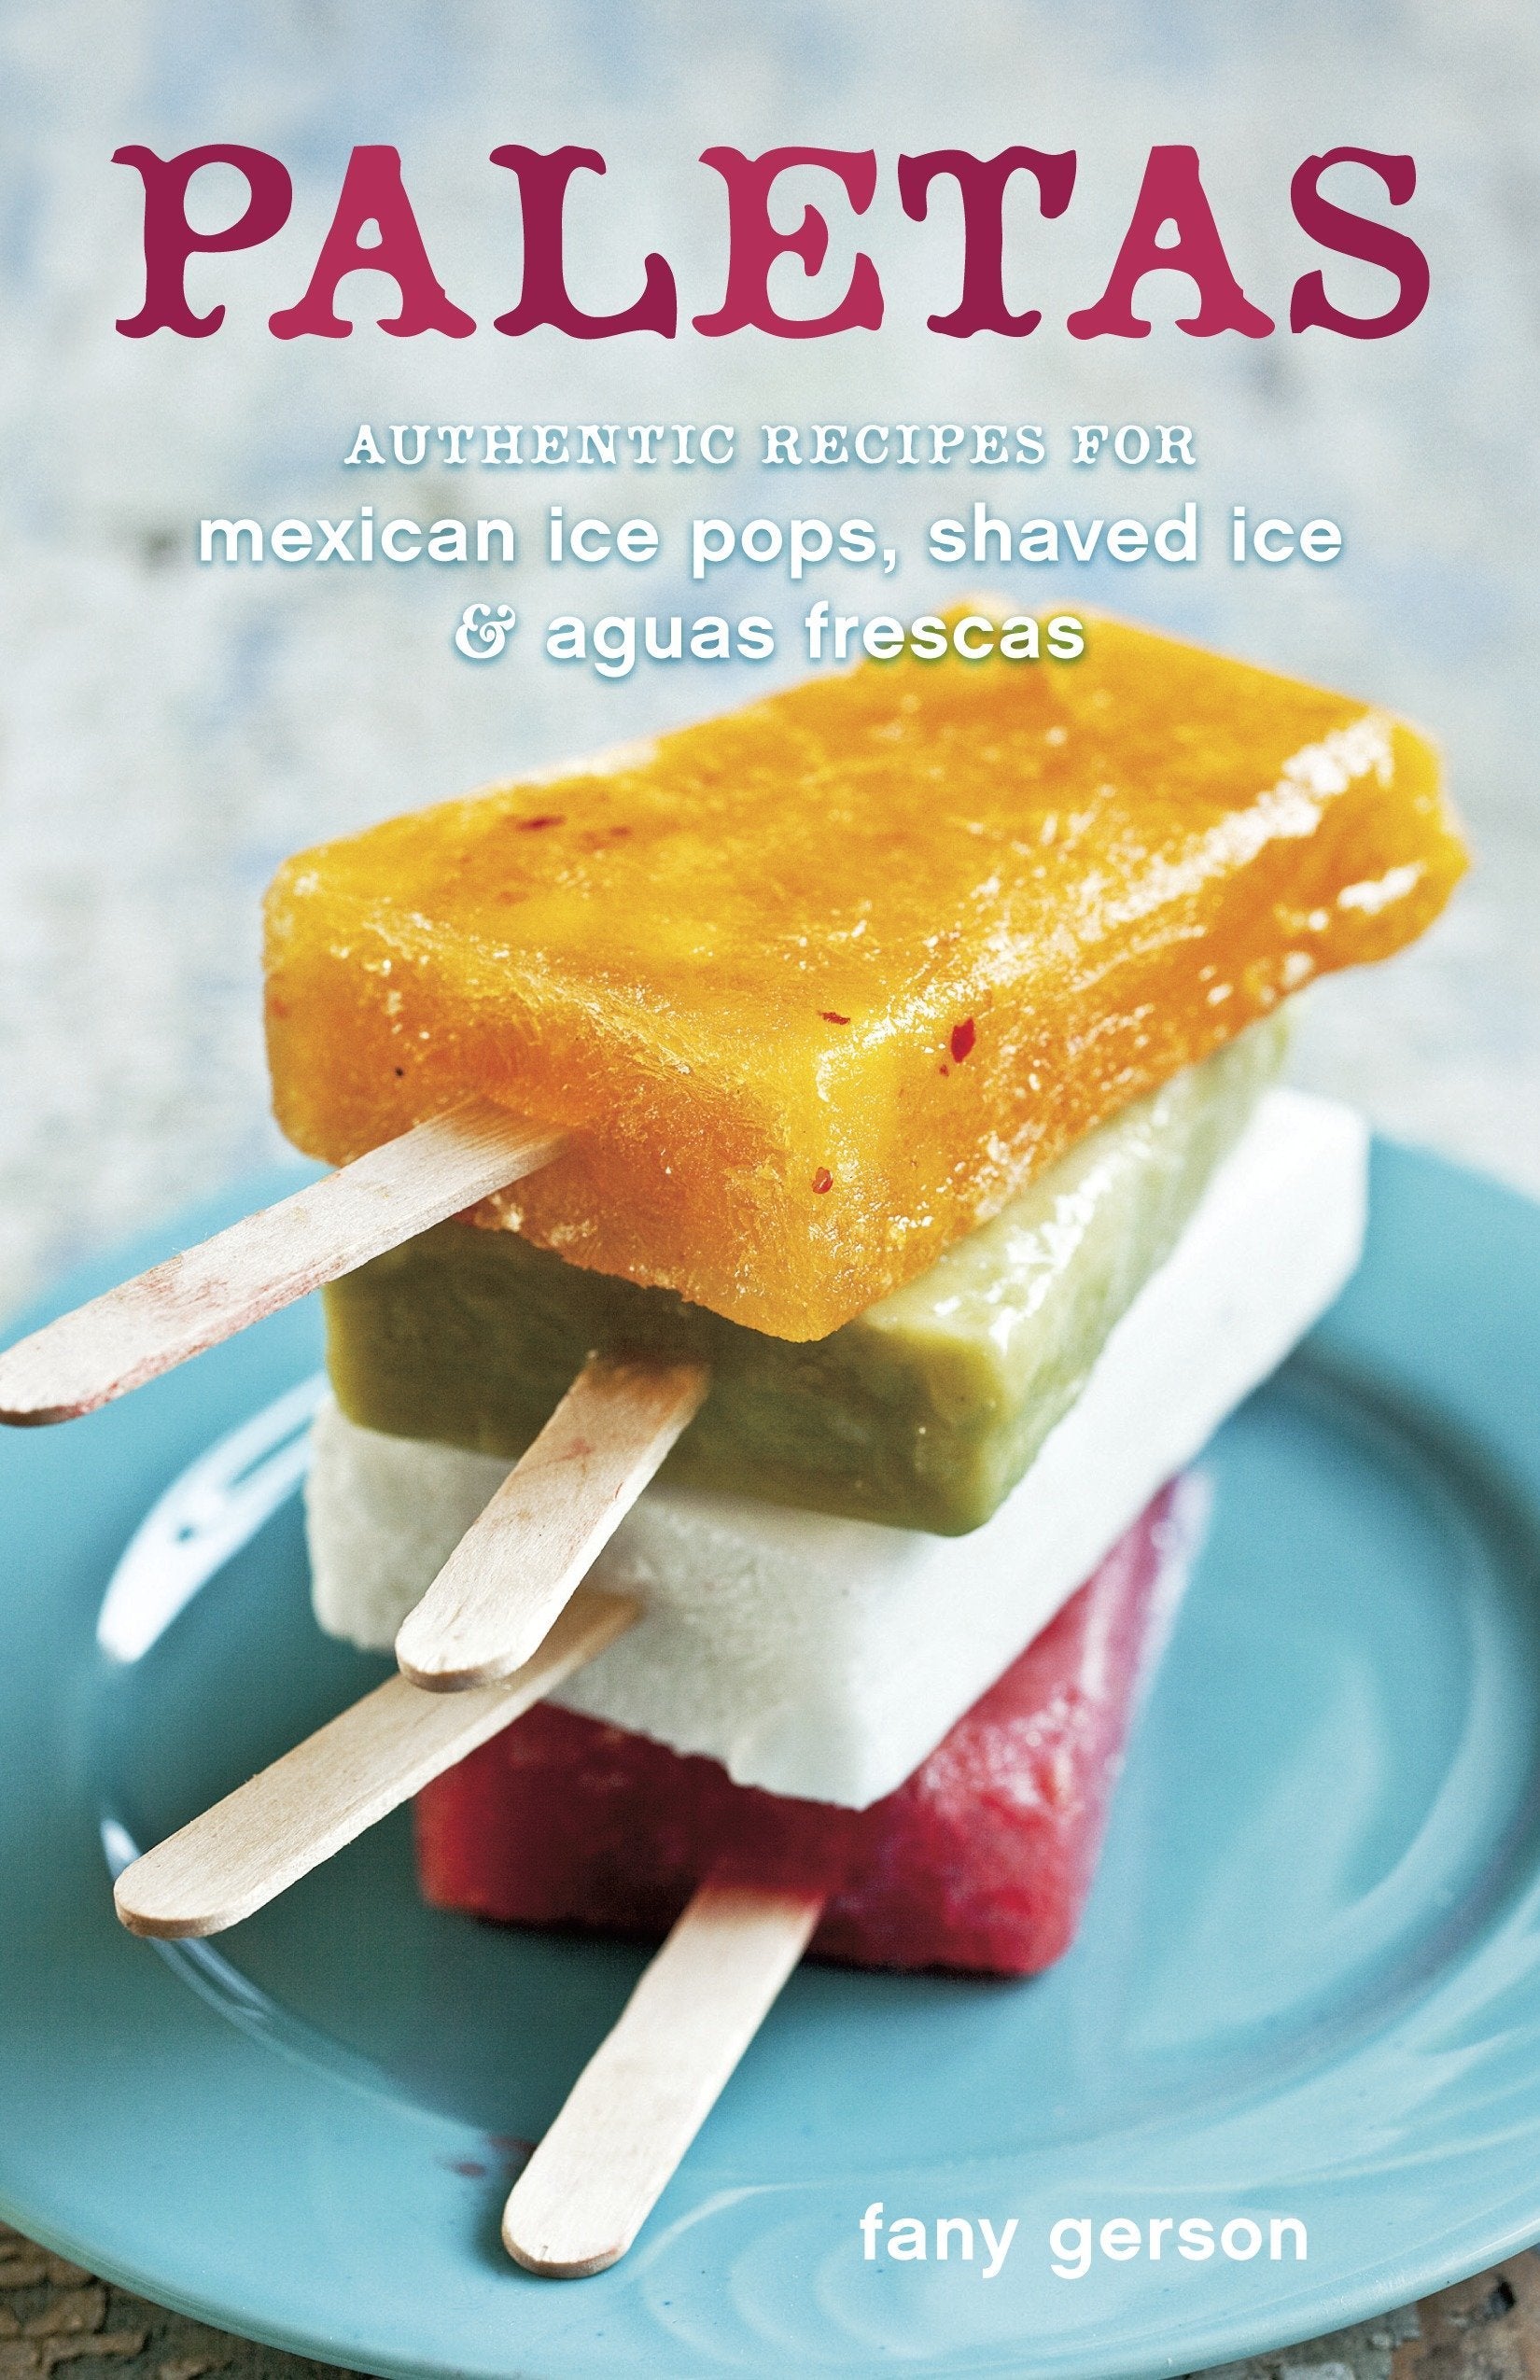 Paletas: Authentic Recipes for Mexican Ice Pops, Shaved Ice & Aguas Frescas (Fany Gerson)